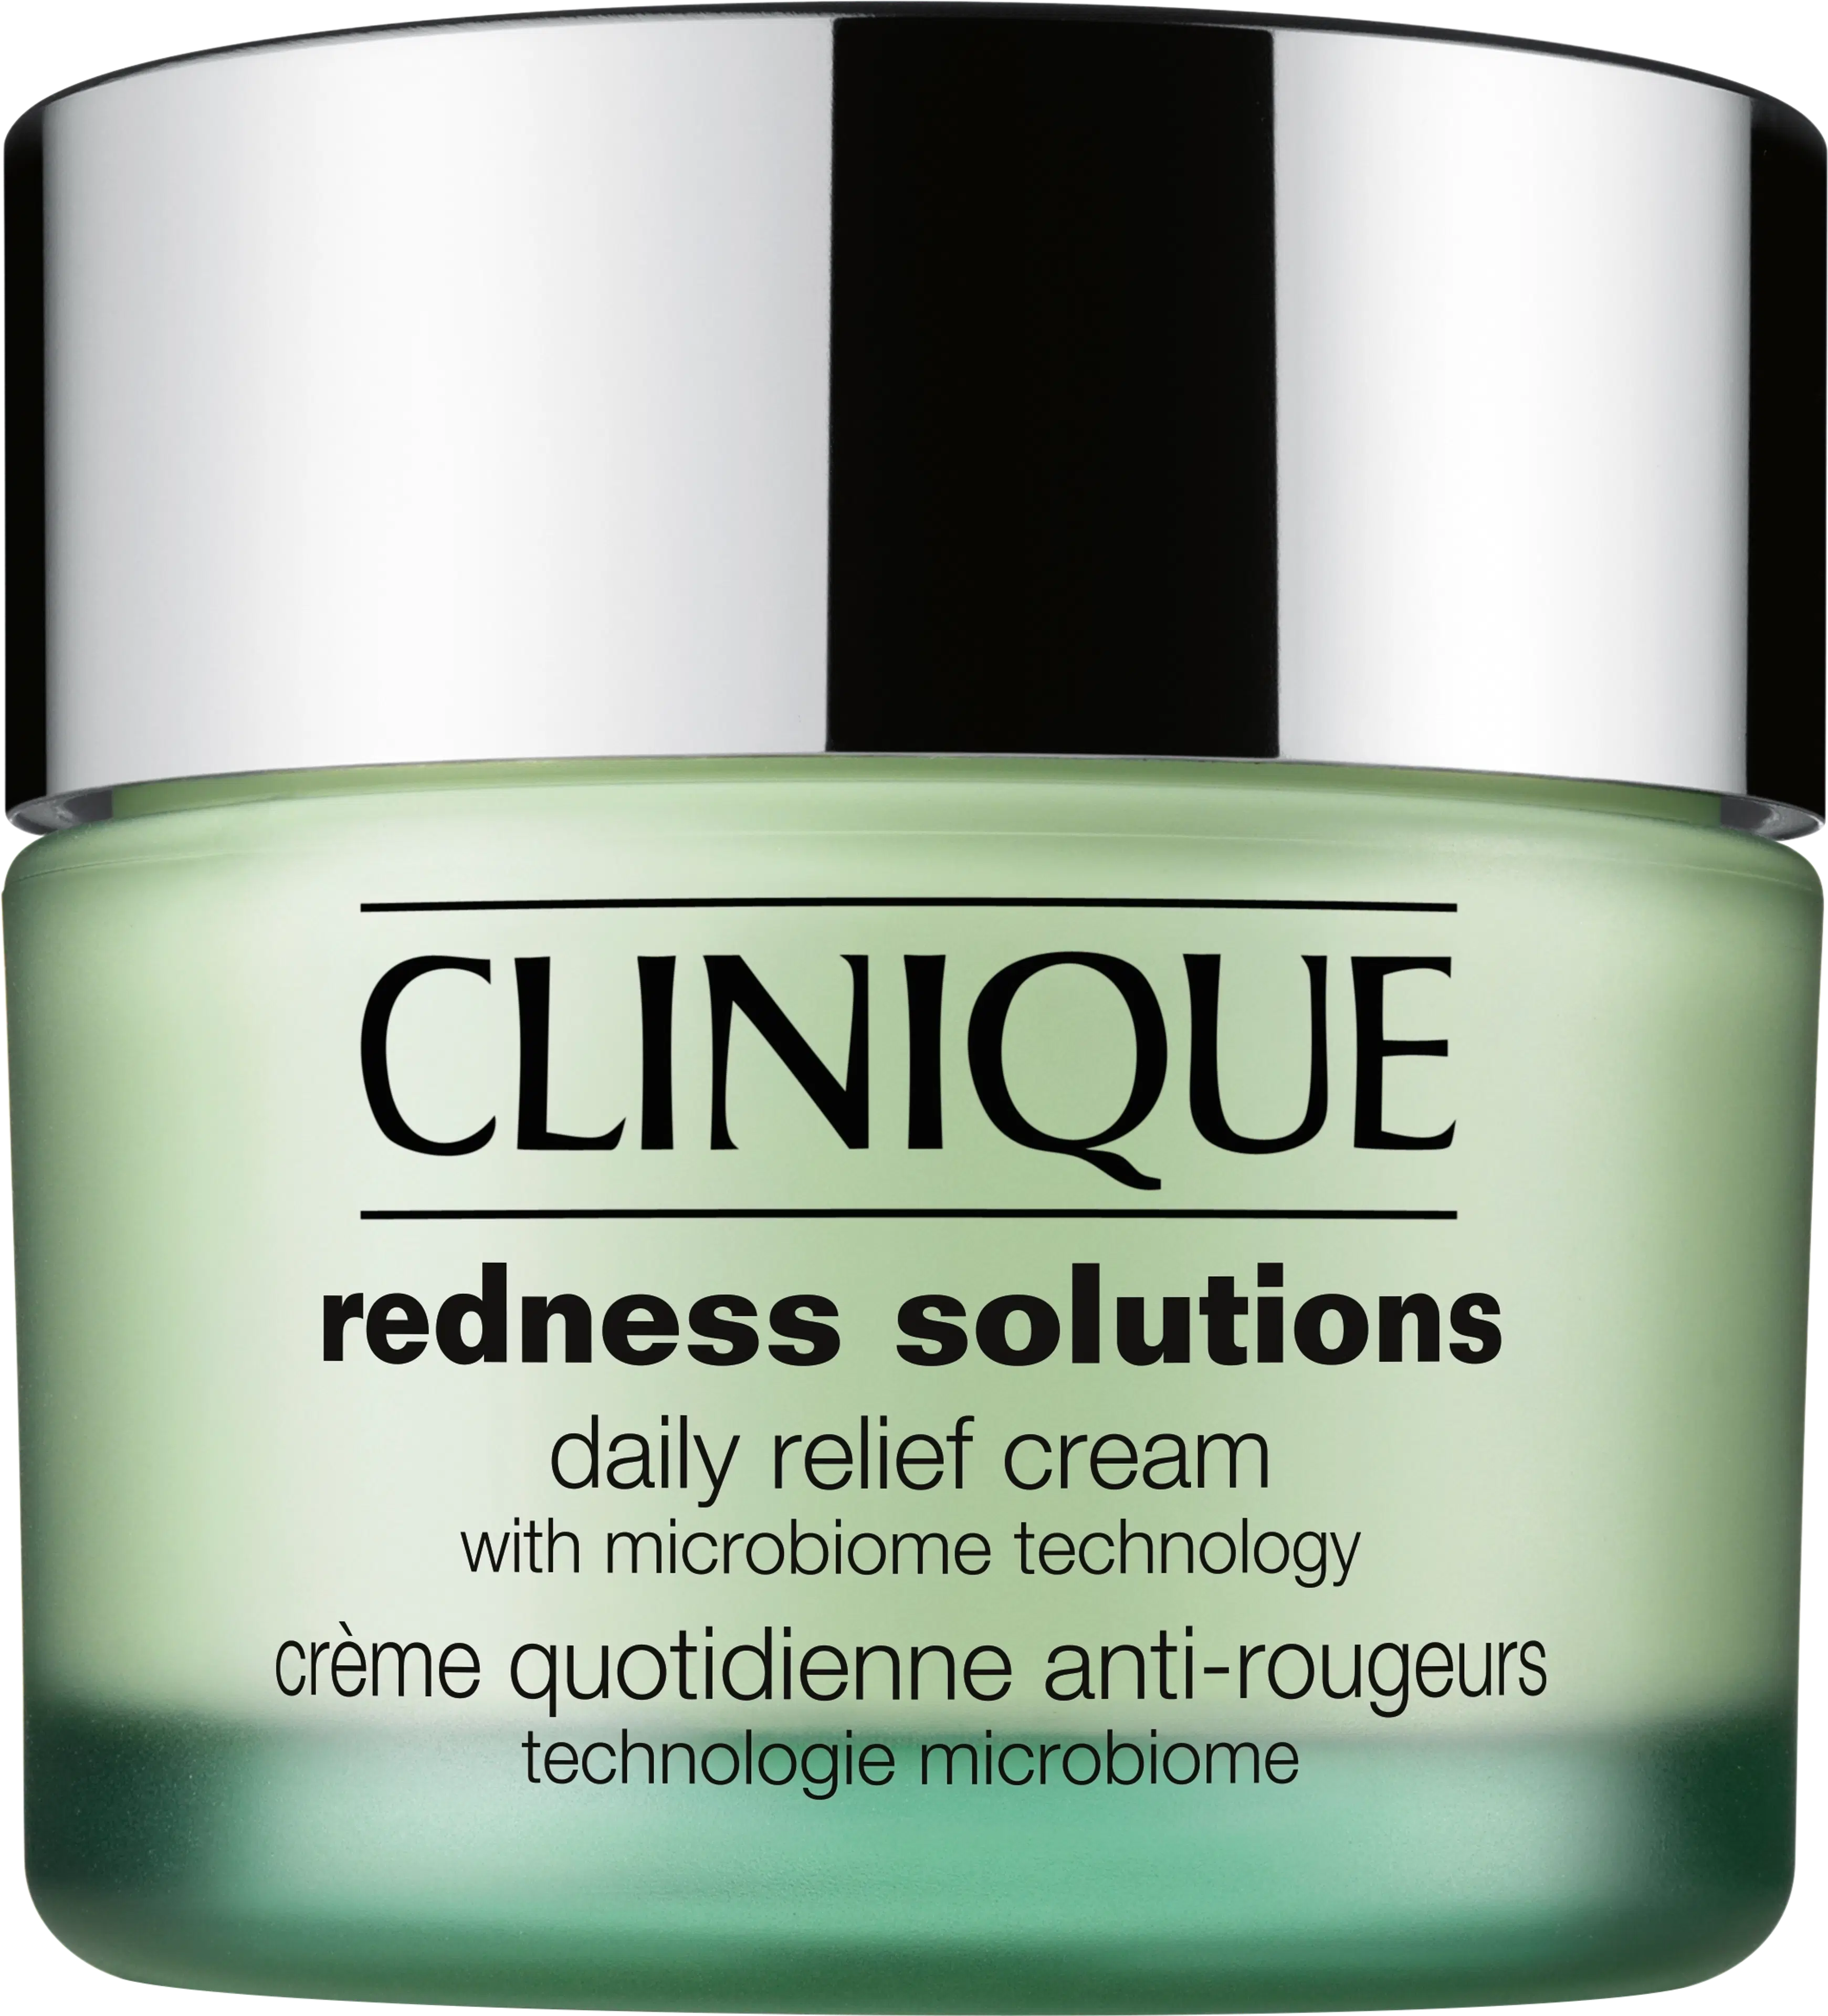 Clinique Redness Solutions Daily Relief Cream kosteuvoide 50 ml